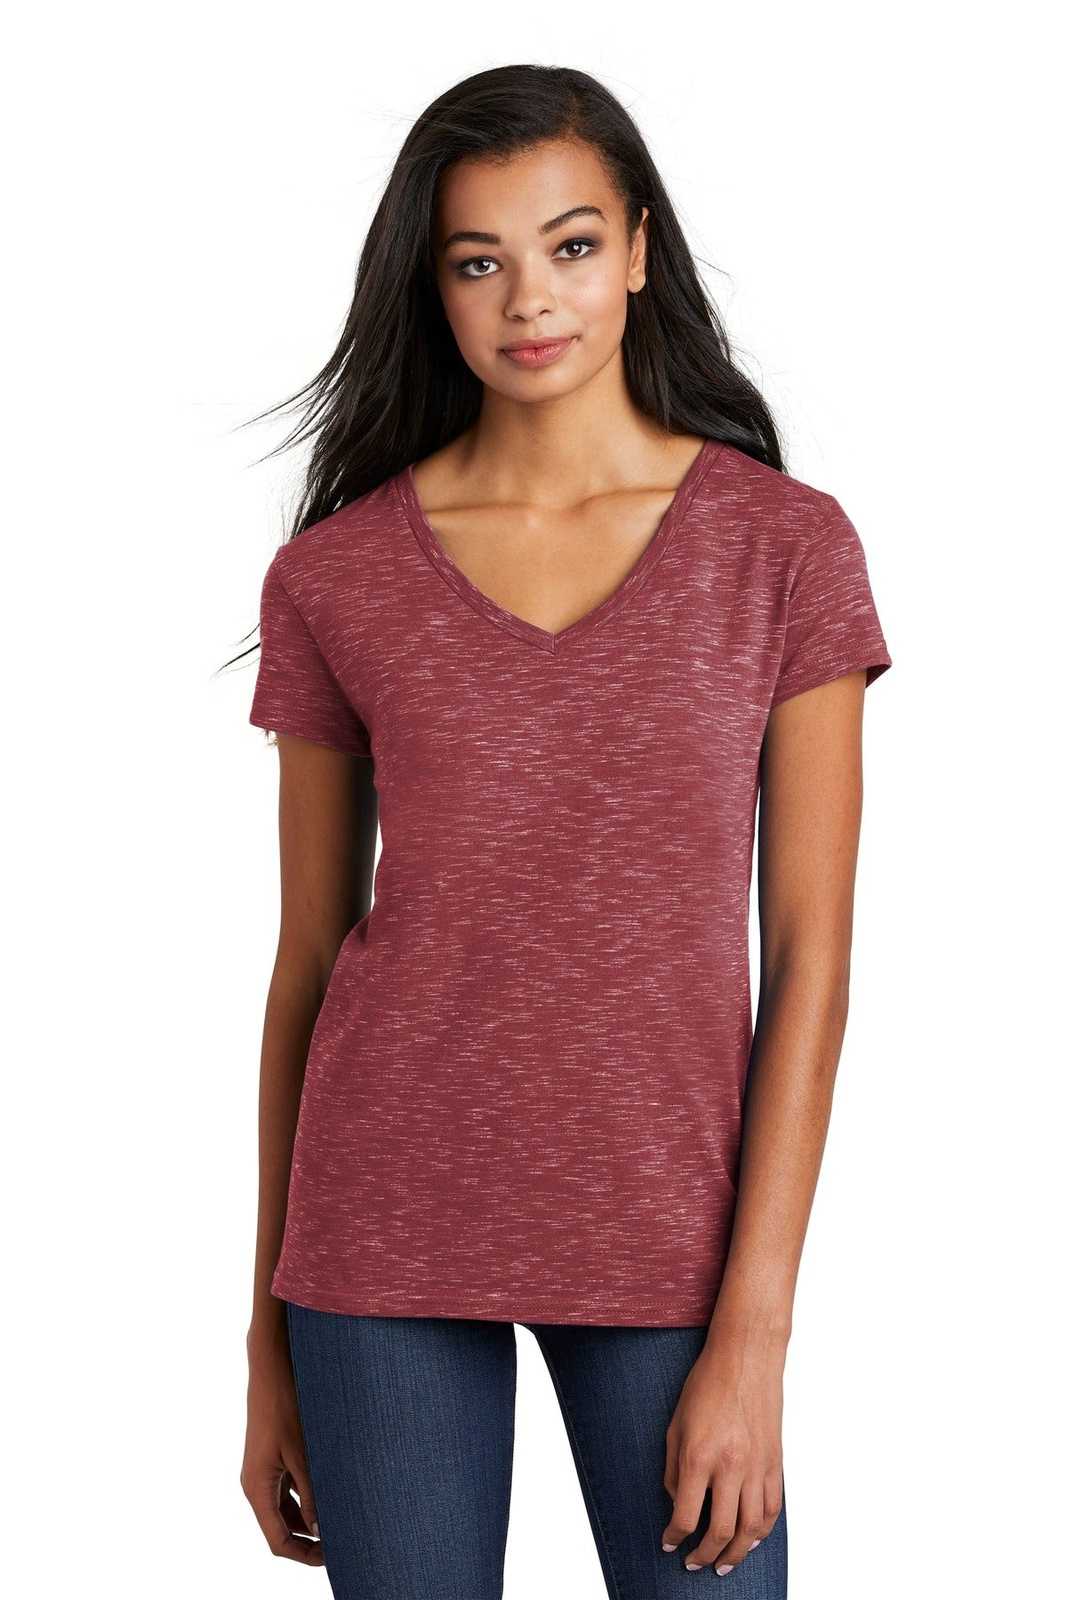 District DT664 Women's Medal V-Neck Tee - Cardinal - HIT a Double - 1